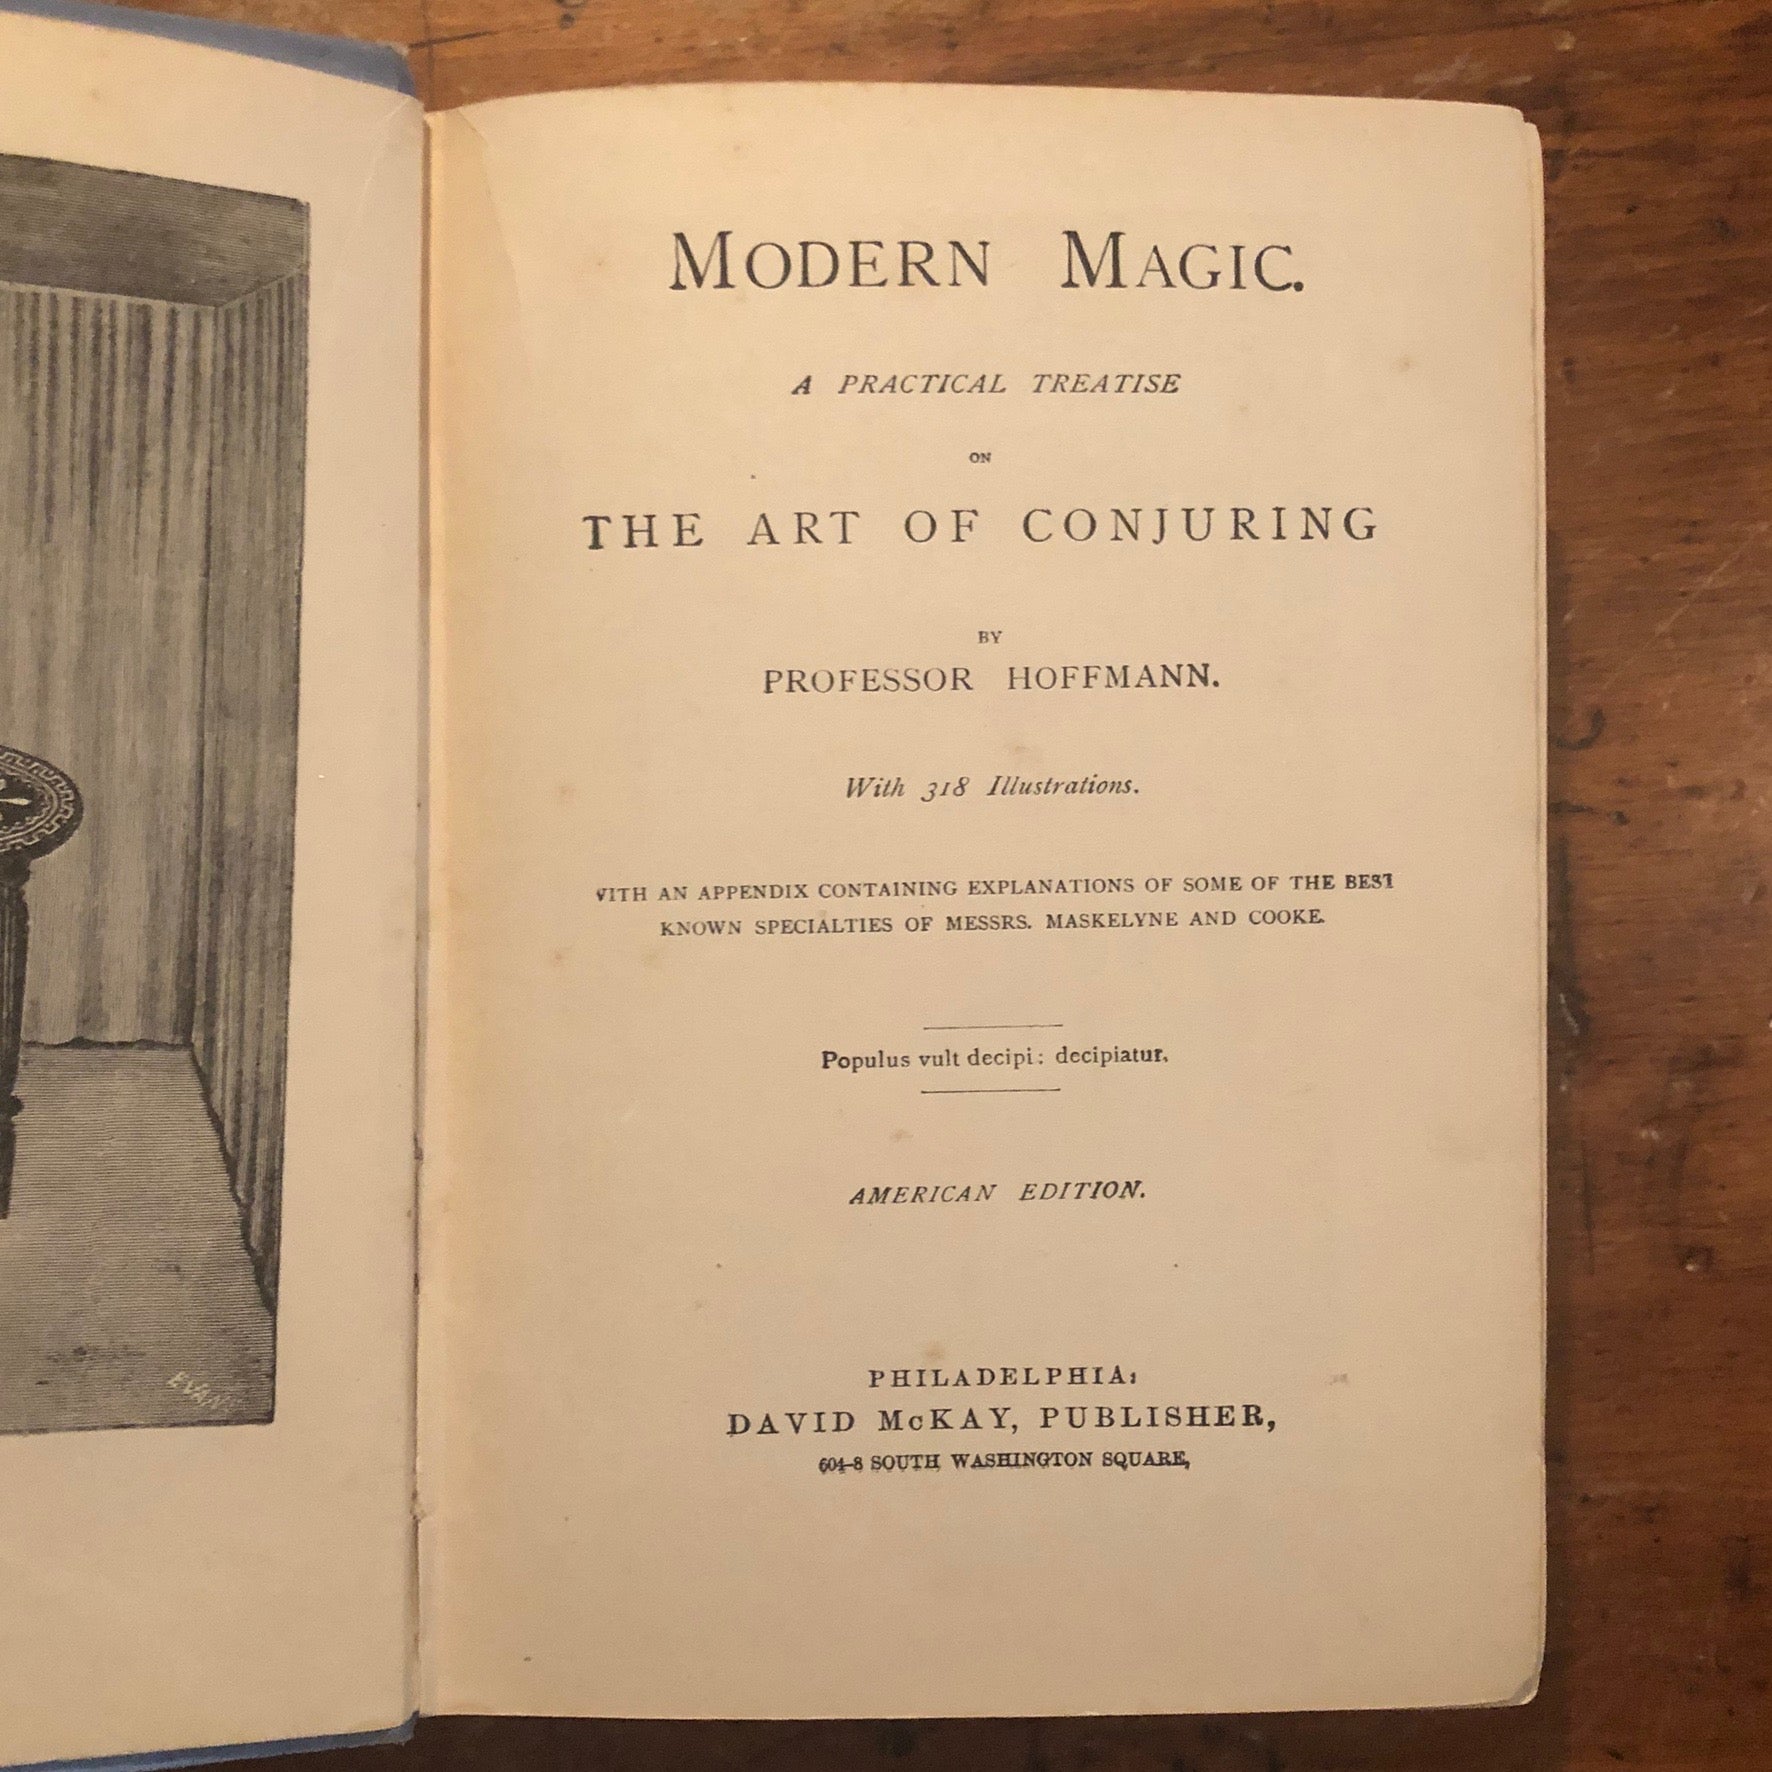 Modern magic : a practical treatise on the art of conjuring